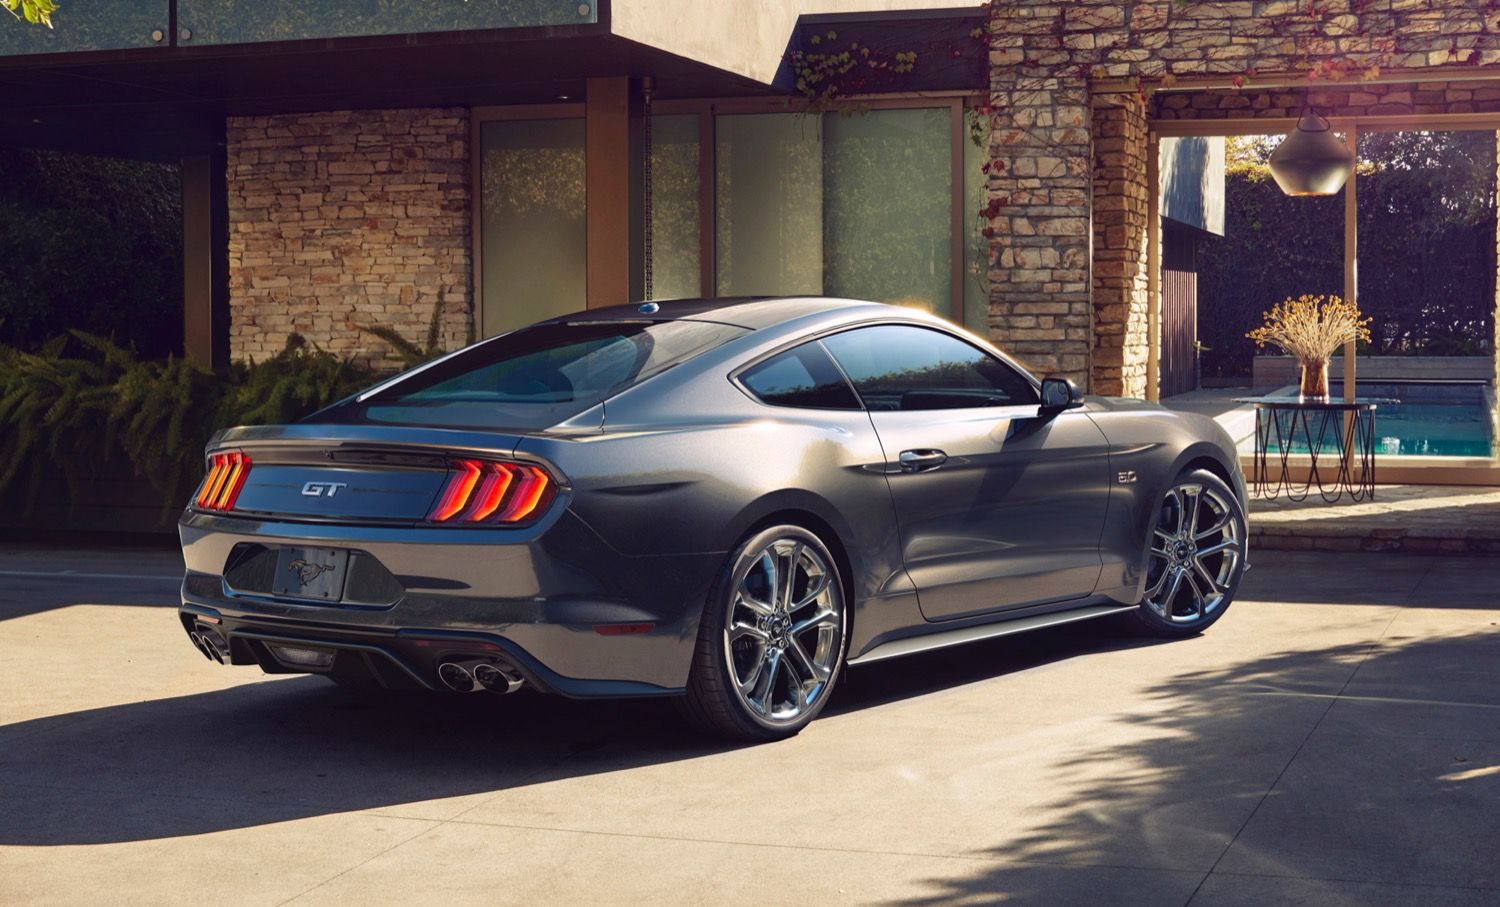 2021 Ford Mustang GT rear view